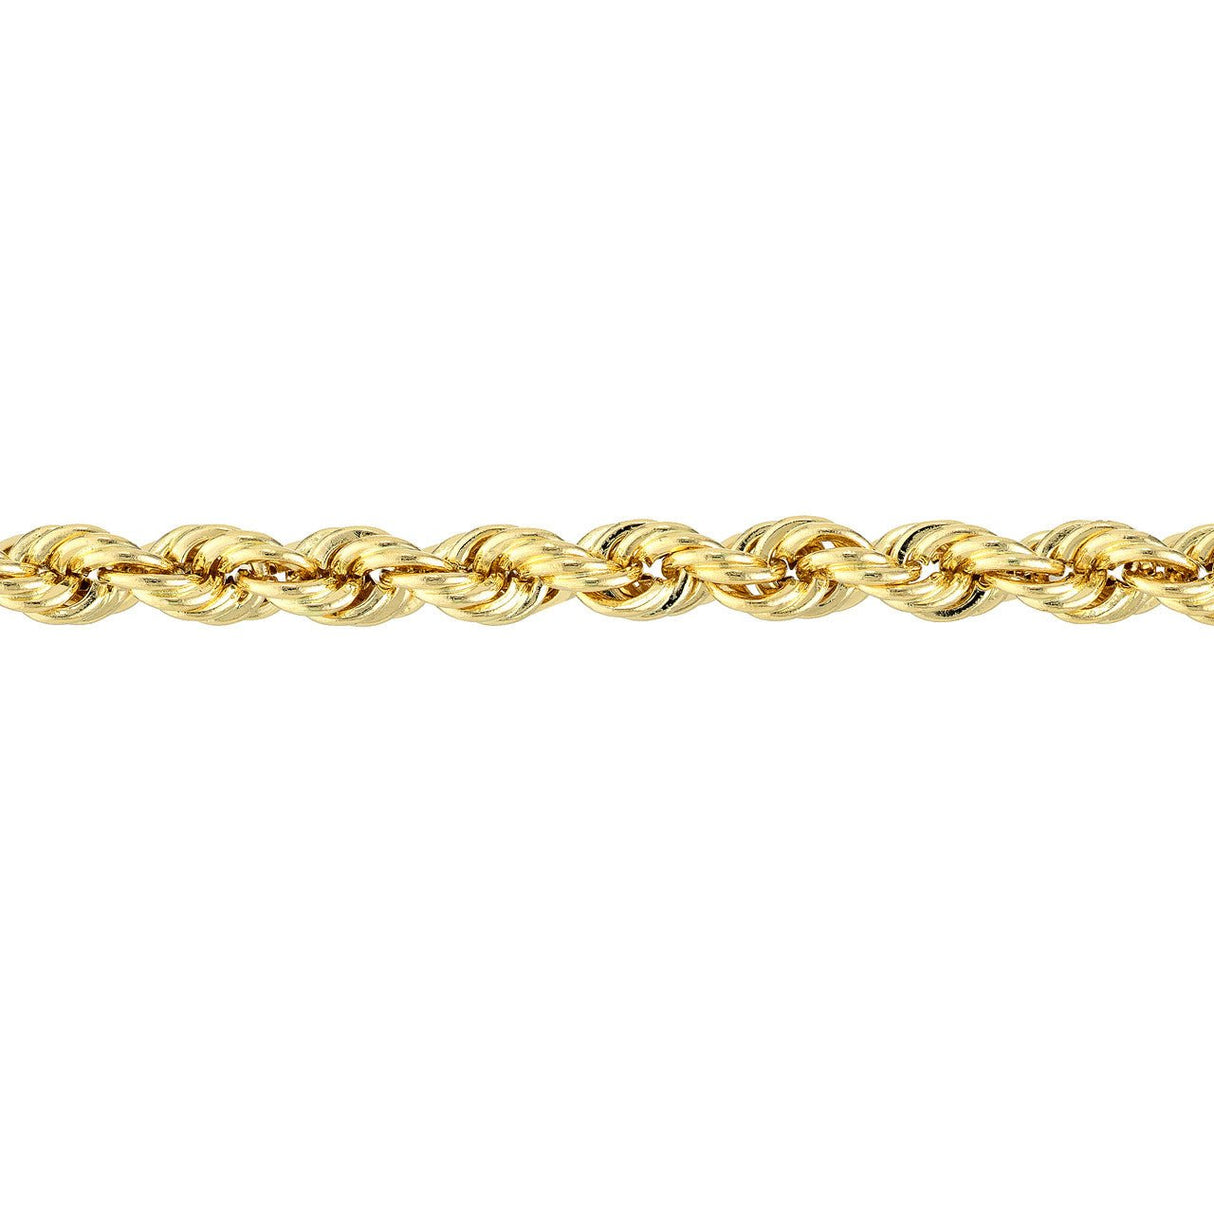 14K Gold Chain, 24", 2.9mm Light Rope Chain with Lobster Lock, Gold Layered Chain, Gold Necklace, - Diamond Origin